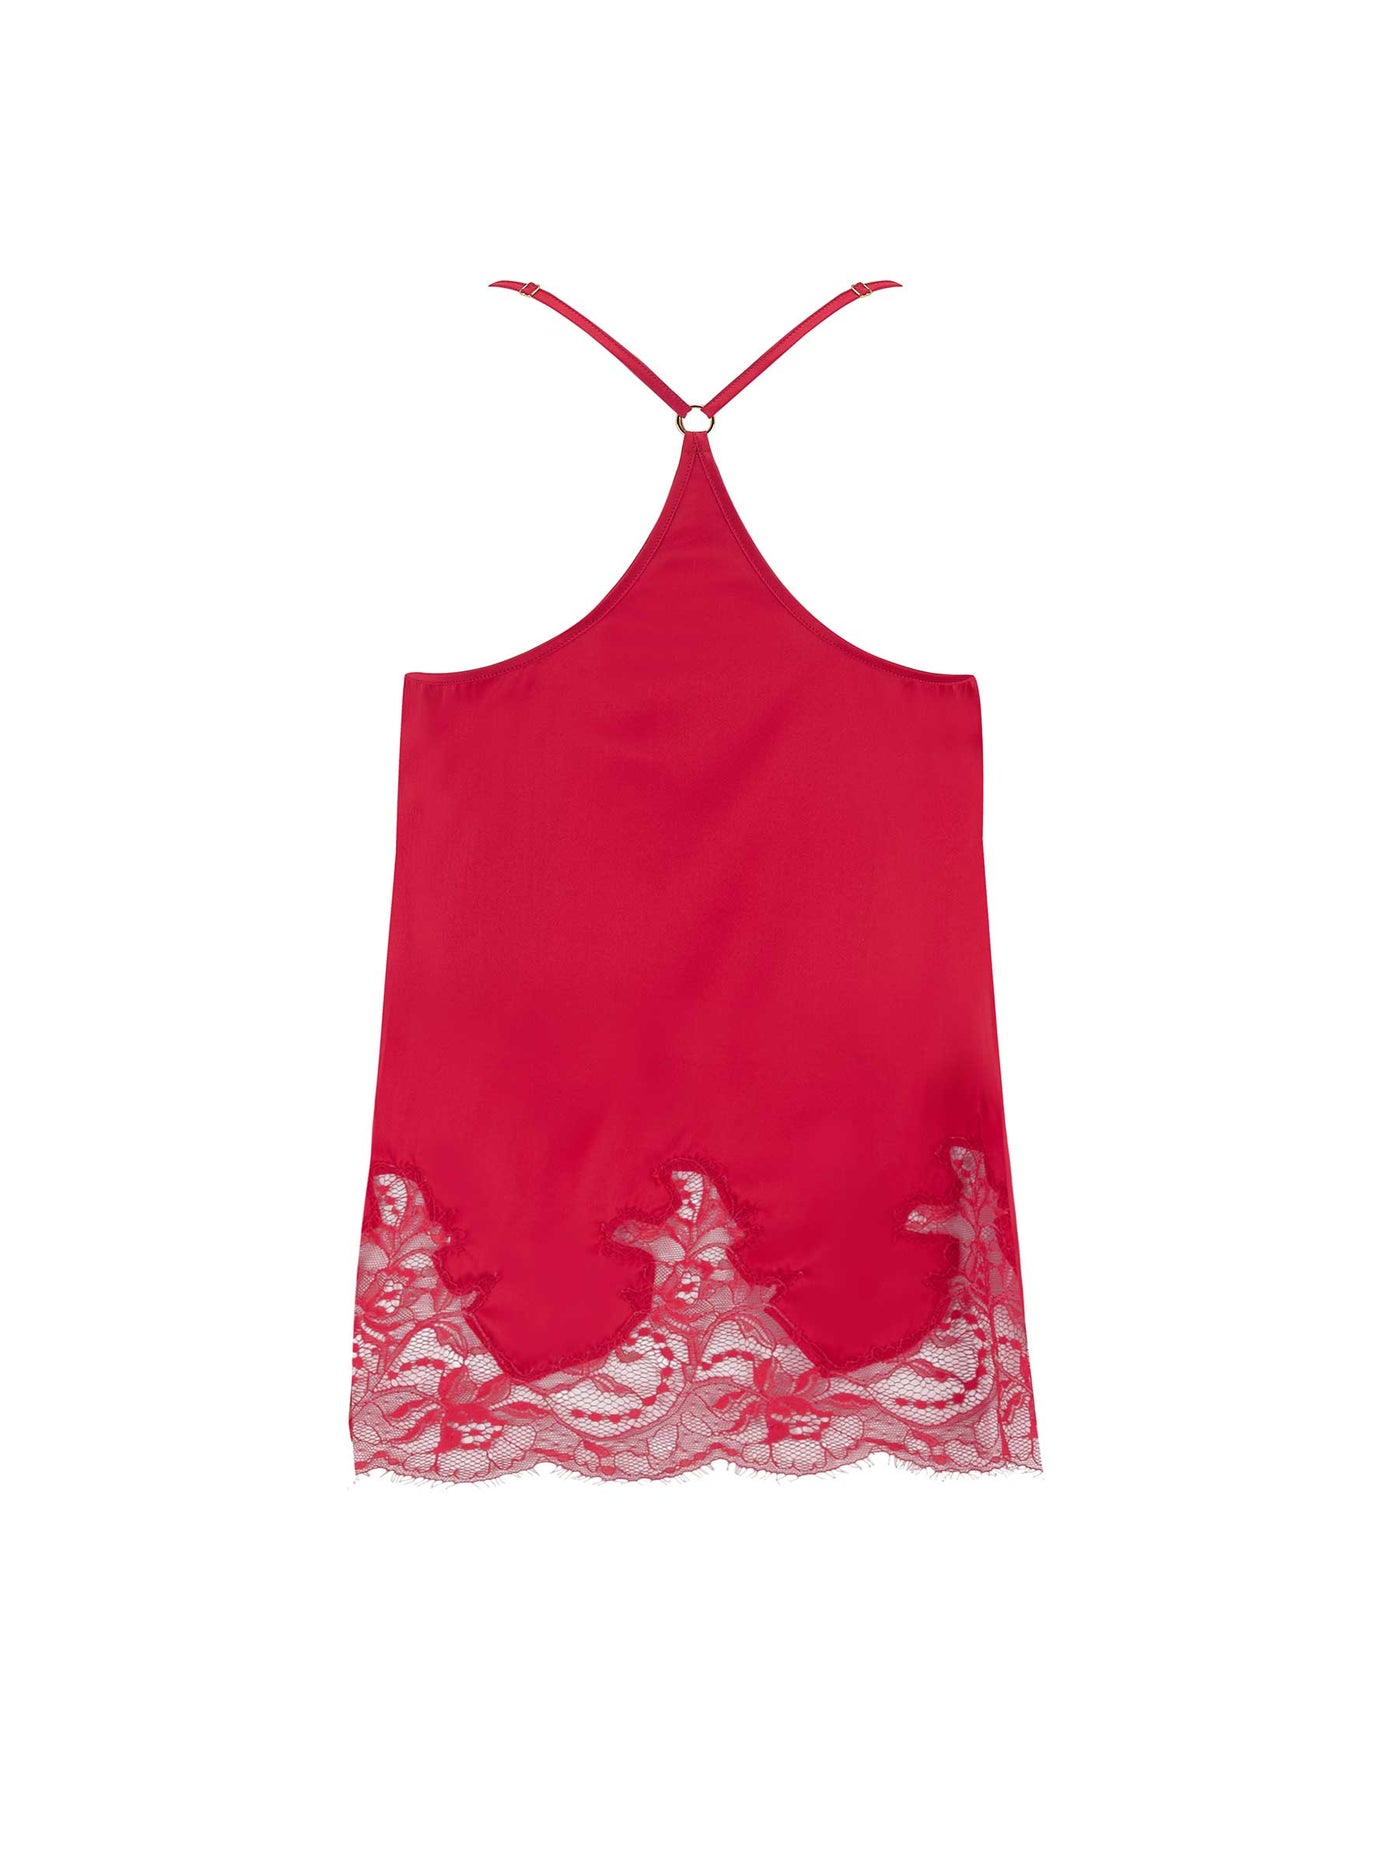 Back of red, silk camisole with lace hem from the Adeline collection.